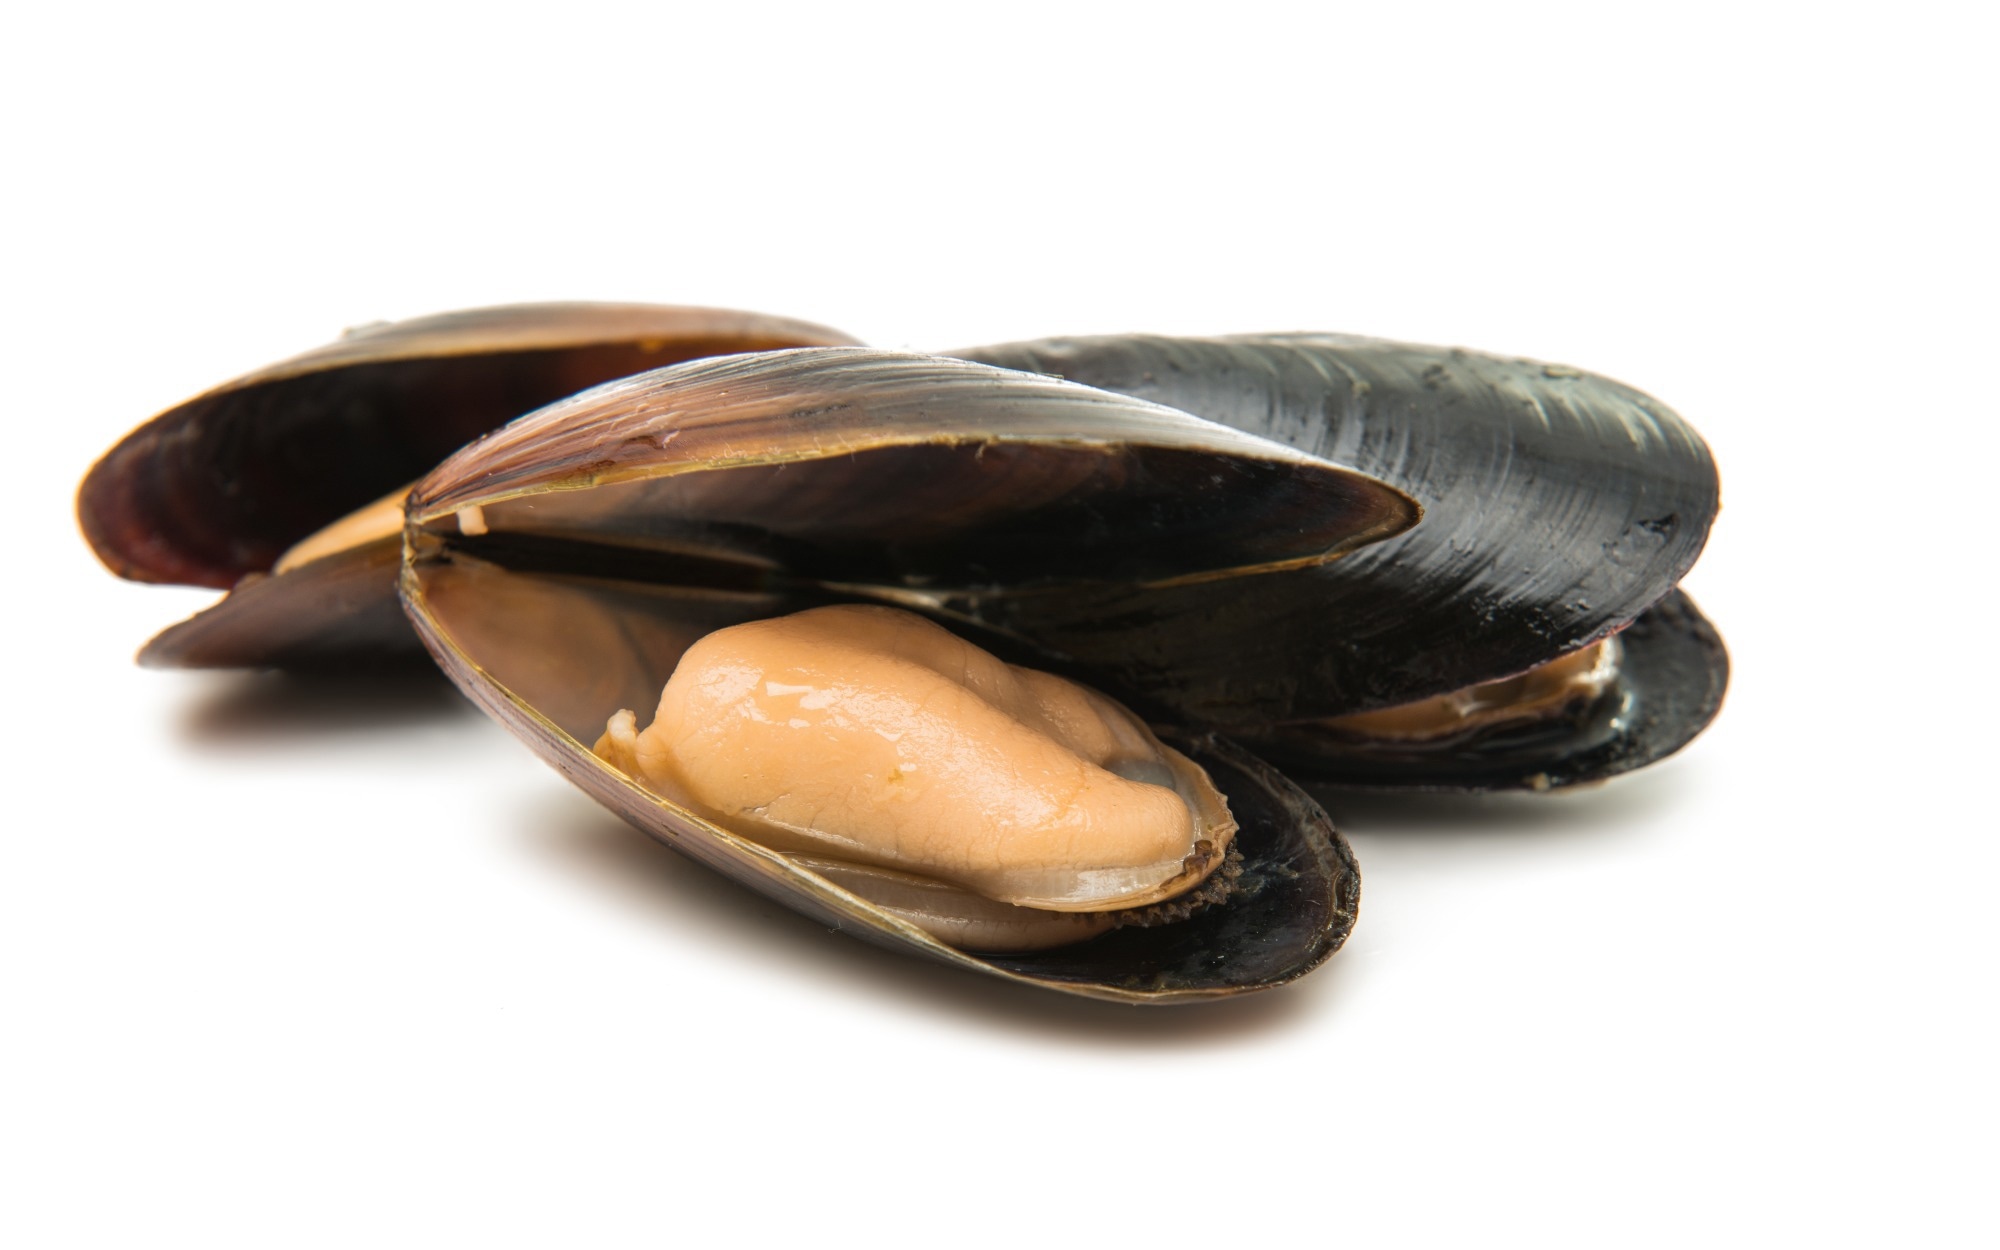 Study: Mussel oil is superior to fish oil in preventing atherosclerosis of ApoE−/− mice. Image Credit: oksana2010 / Shutterstock